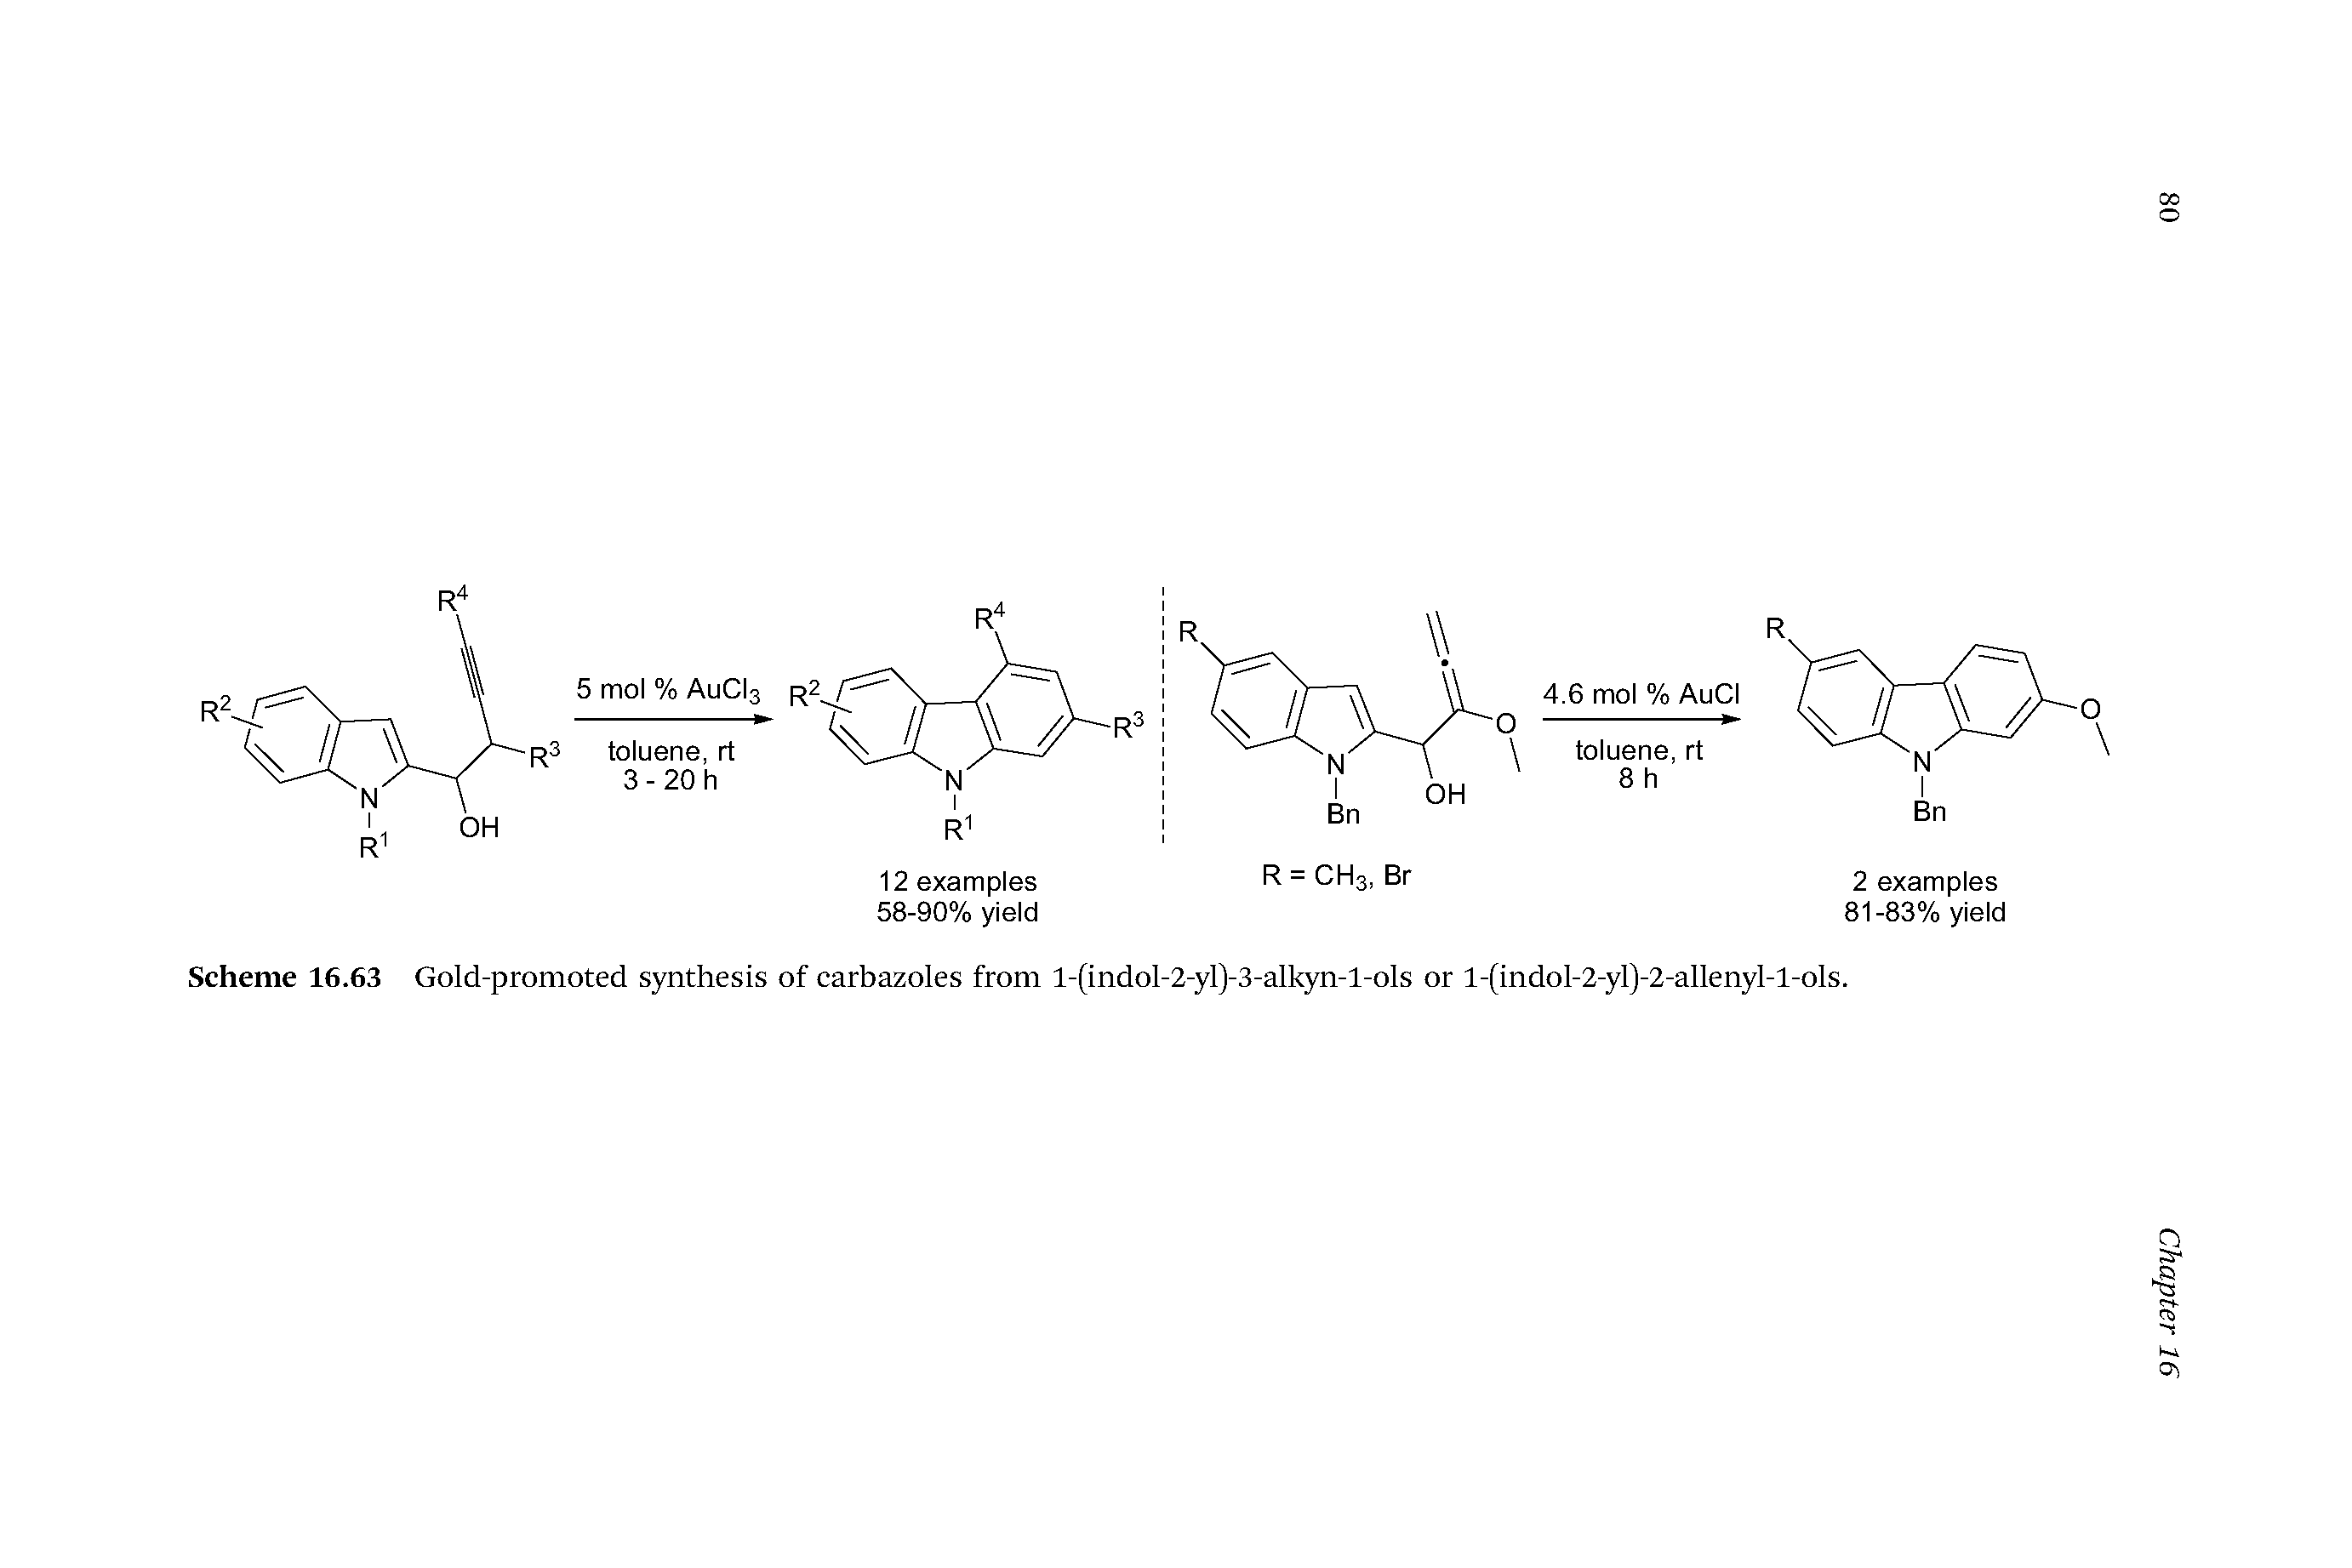 Scheme 16.63 Gold-promoted synthesis of carbazoles from l-(indol-2-yl)-3-alkyn-l-ols or l-(indol-2-yl)-2-allenyl-l-ols.